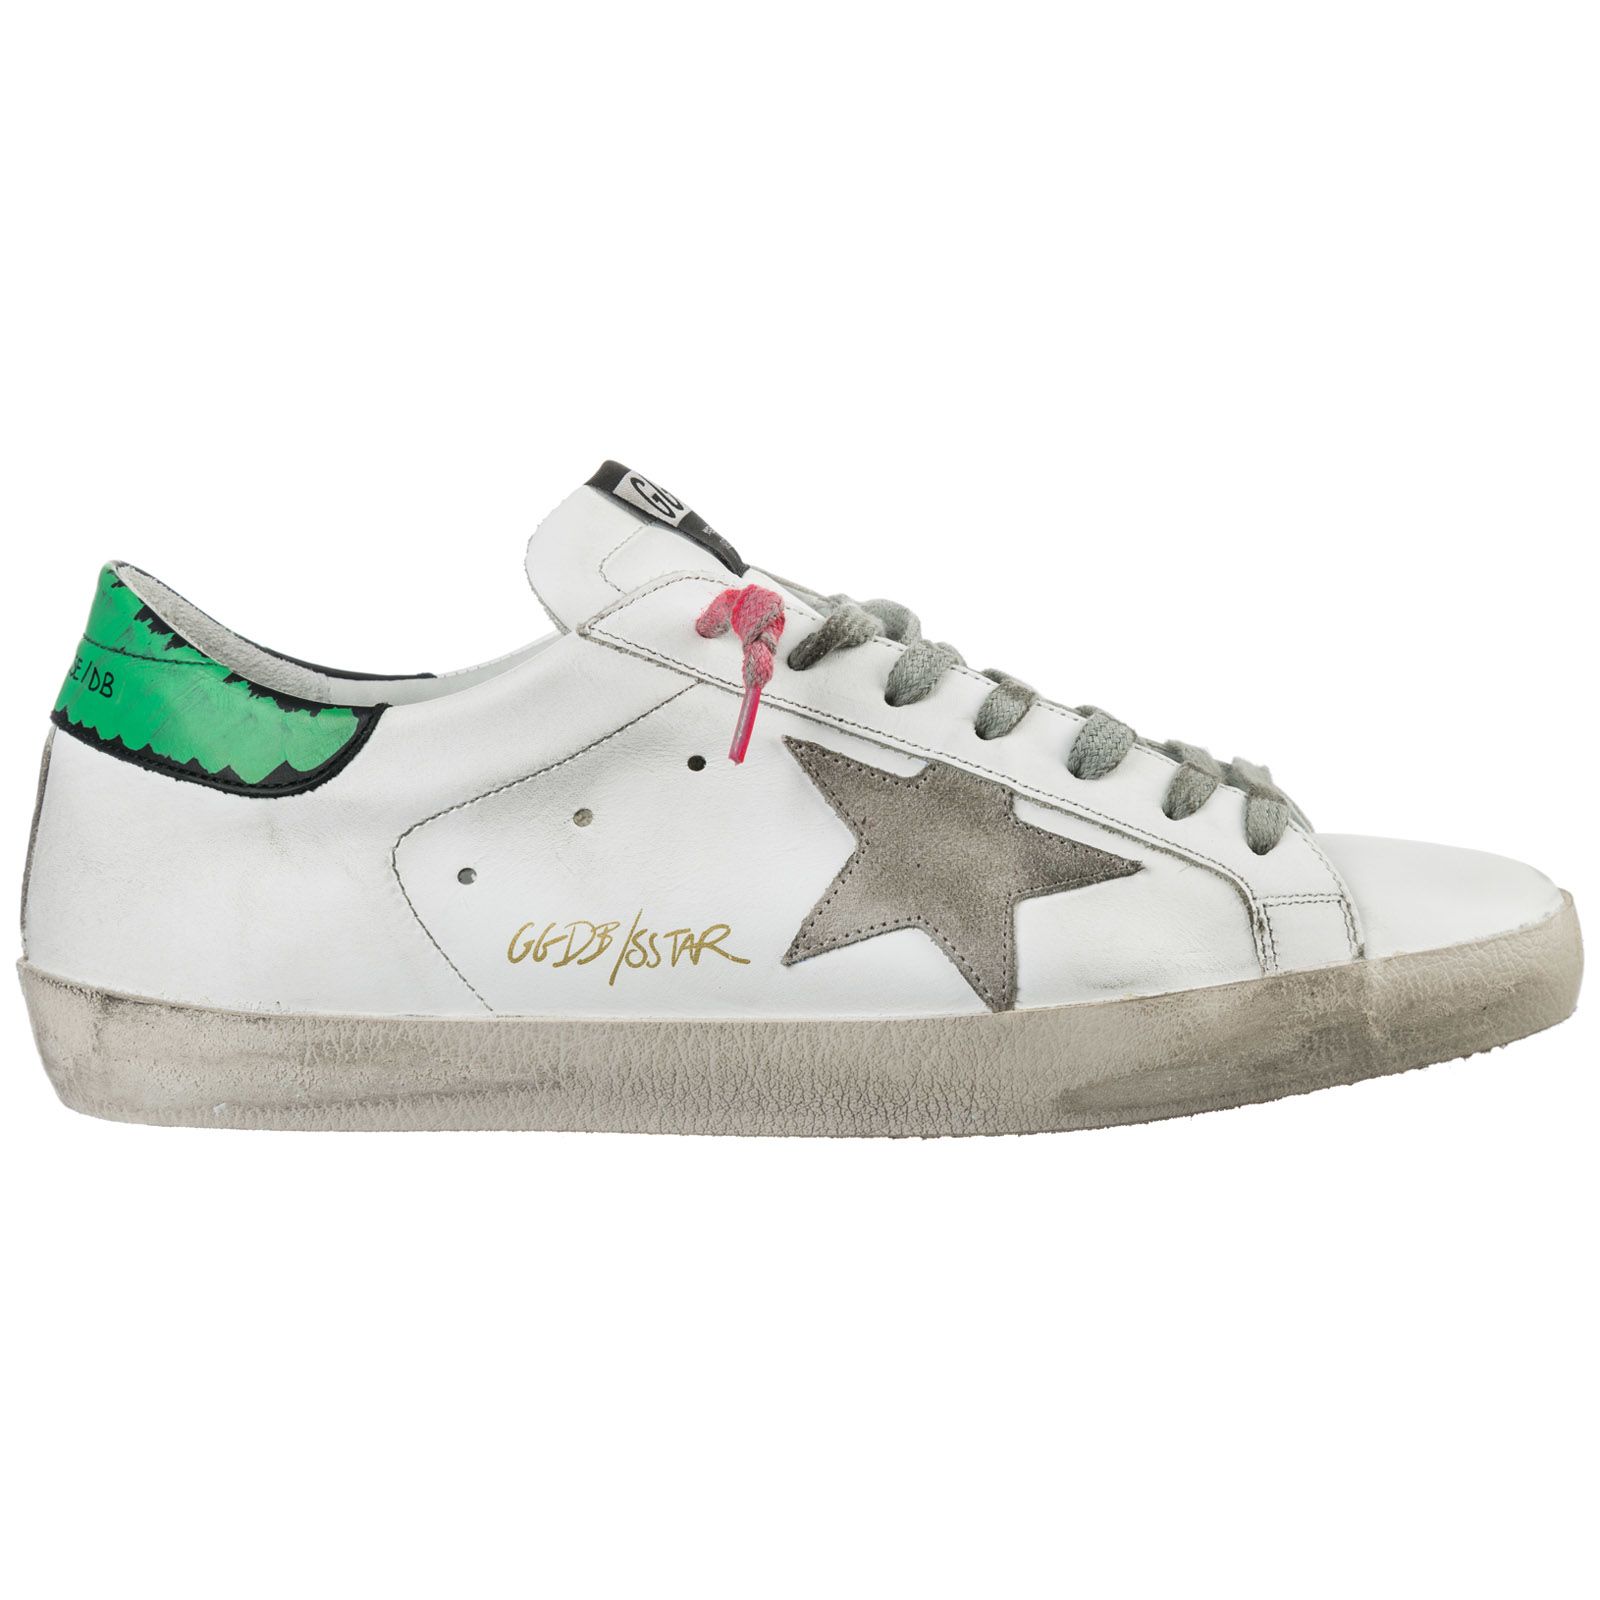 Golden Goose Golden Goose Shoes Leather Trainers Sneakers Superstar - Basic - 10832585 | italist